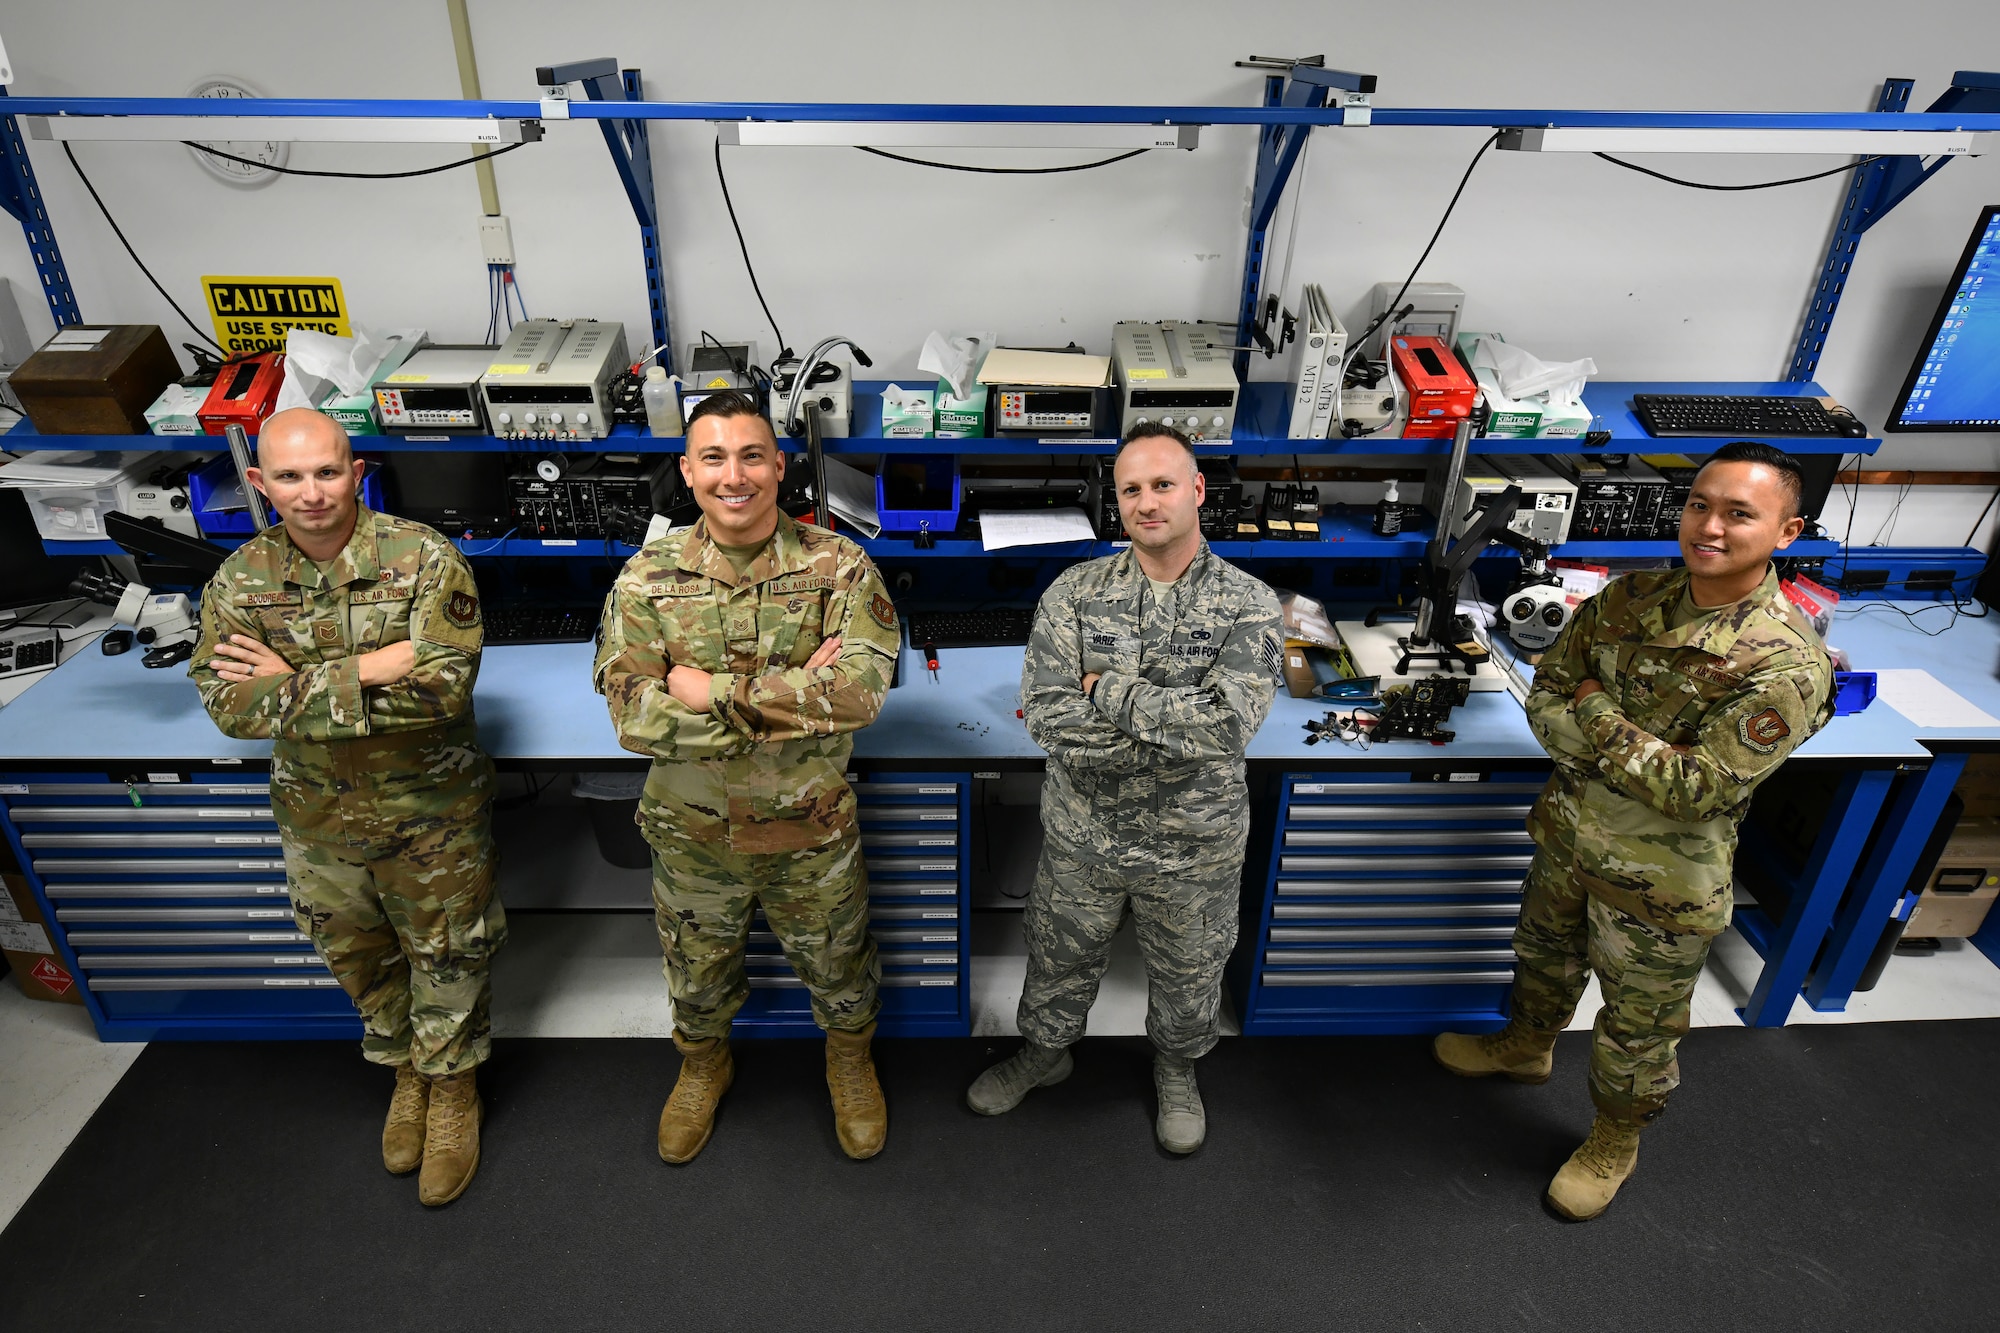 Airmen from the 31st Maintenance Group Air Force Repair Enhancement Program in their workspace, Sep. 9, 2019, at Aviano Air Base, Italy. AFREP technicians have the expertise and jurisdiction to repair a variety of the 31st Fight Wing’s damaged items in an effort to save the wing and the U.S. Air Force money. (U.S. Air Force photo by Senior Airman Kevin Sommer Giron)